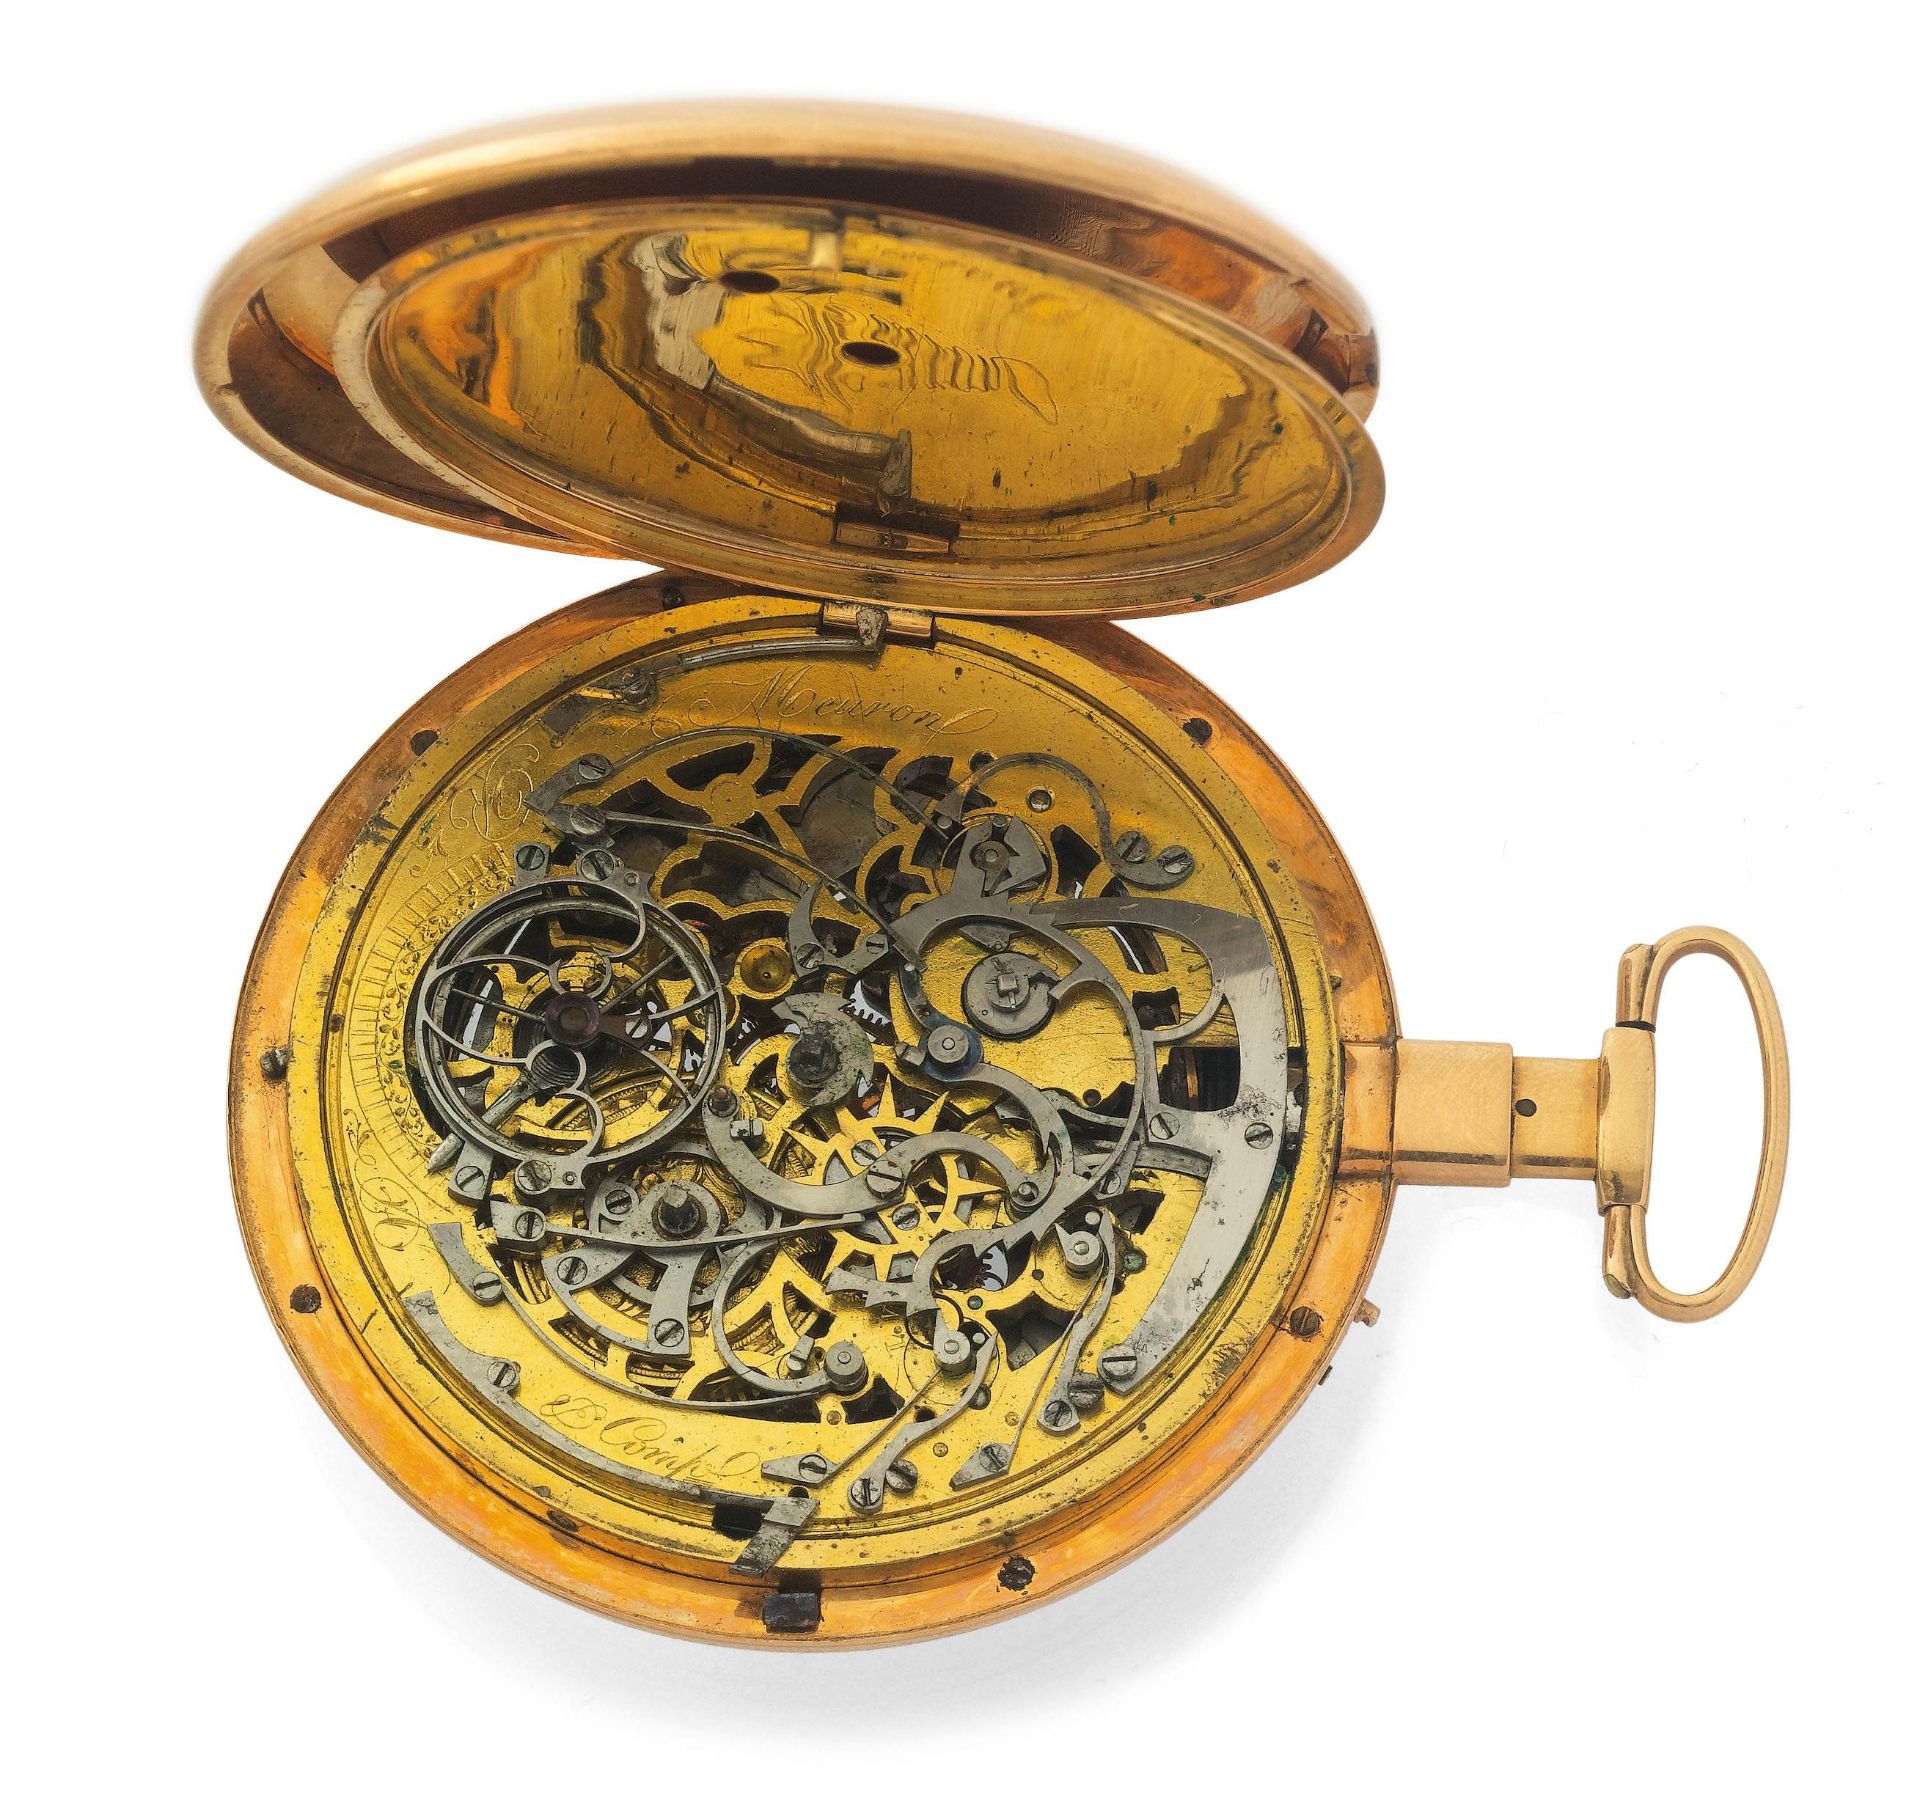 Meuron et Comp., large skeleton watch with 1/4-repeater and automation, ca. 1810. - Image 2 of 4